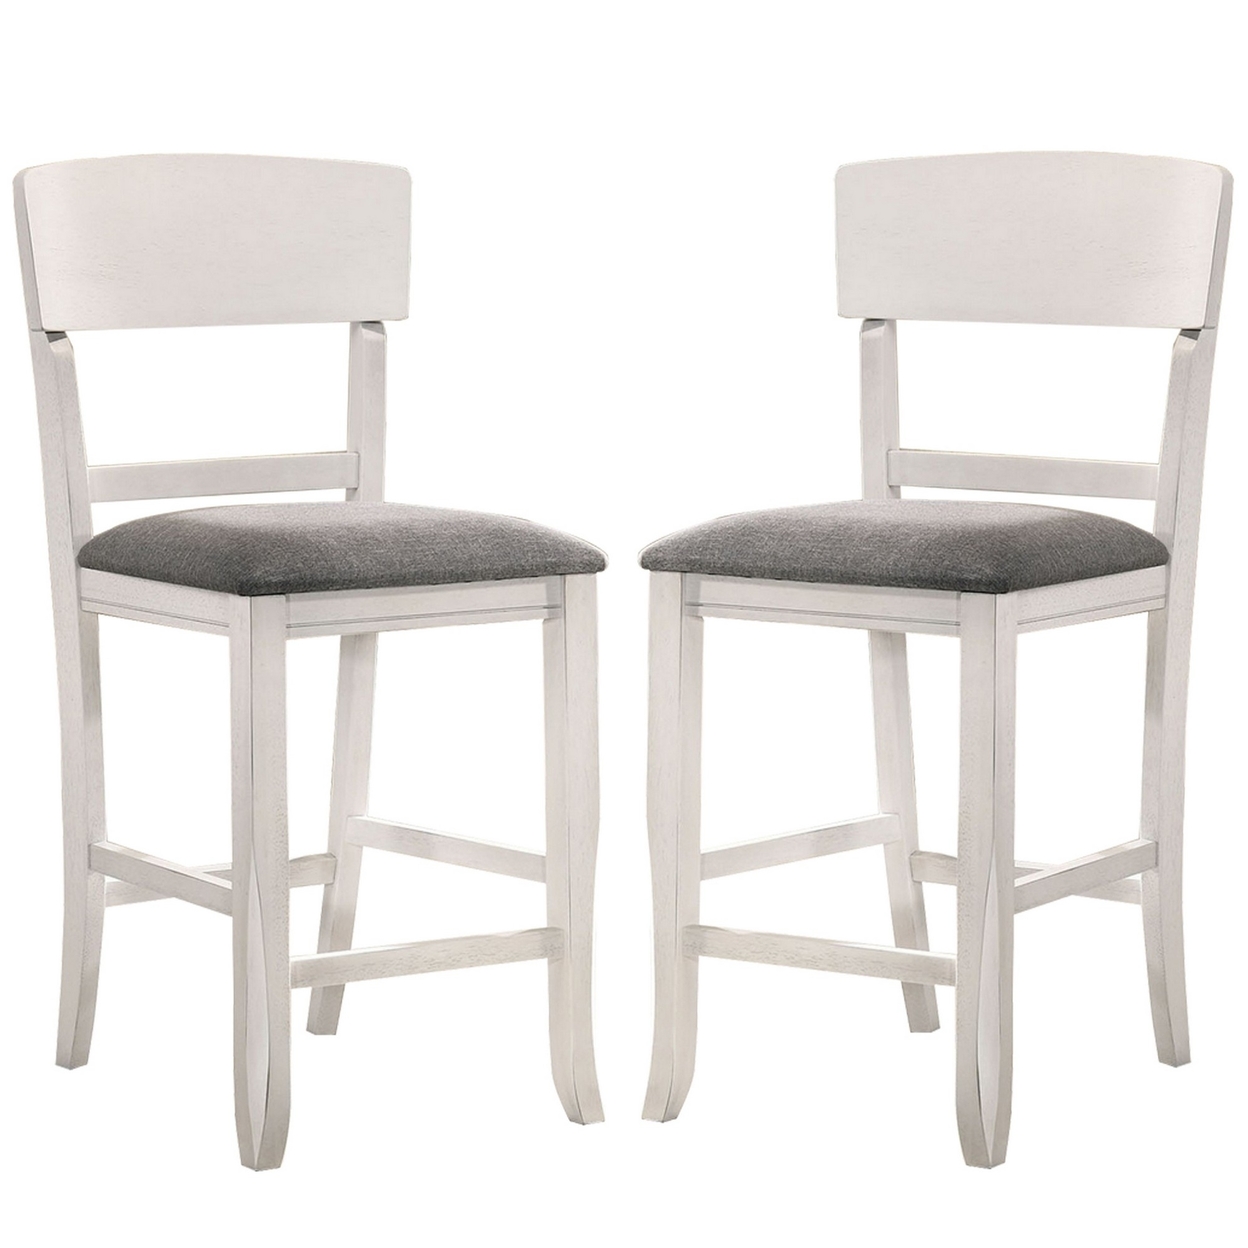 Wooden Counter Height Chair With Curved Back, Set Of 2, White And Gray- Saltoro Sherpi